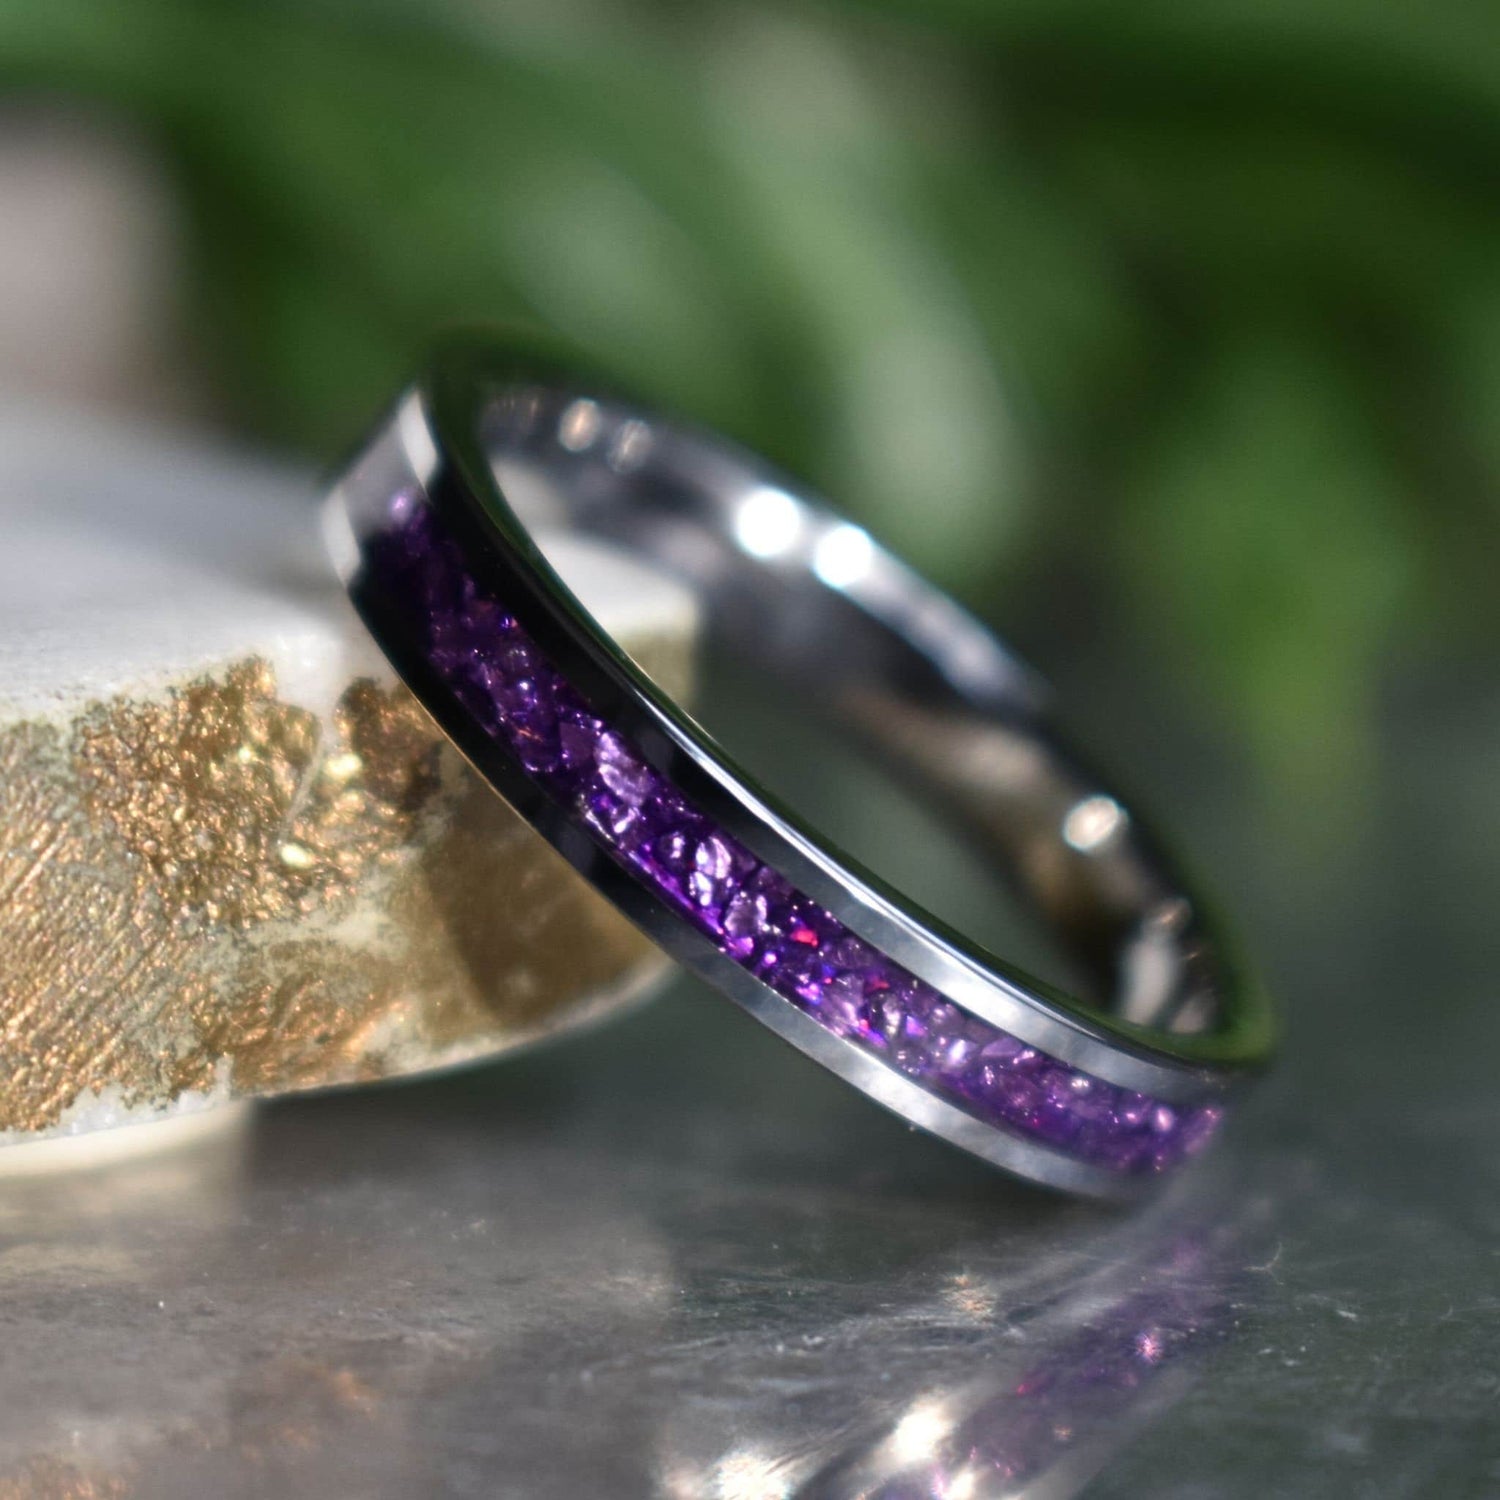 Tungsten 4mm Ring with Amethyst Inlay